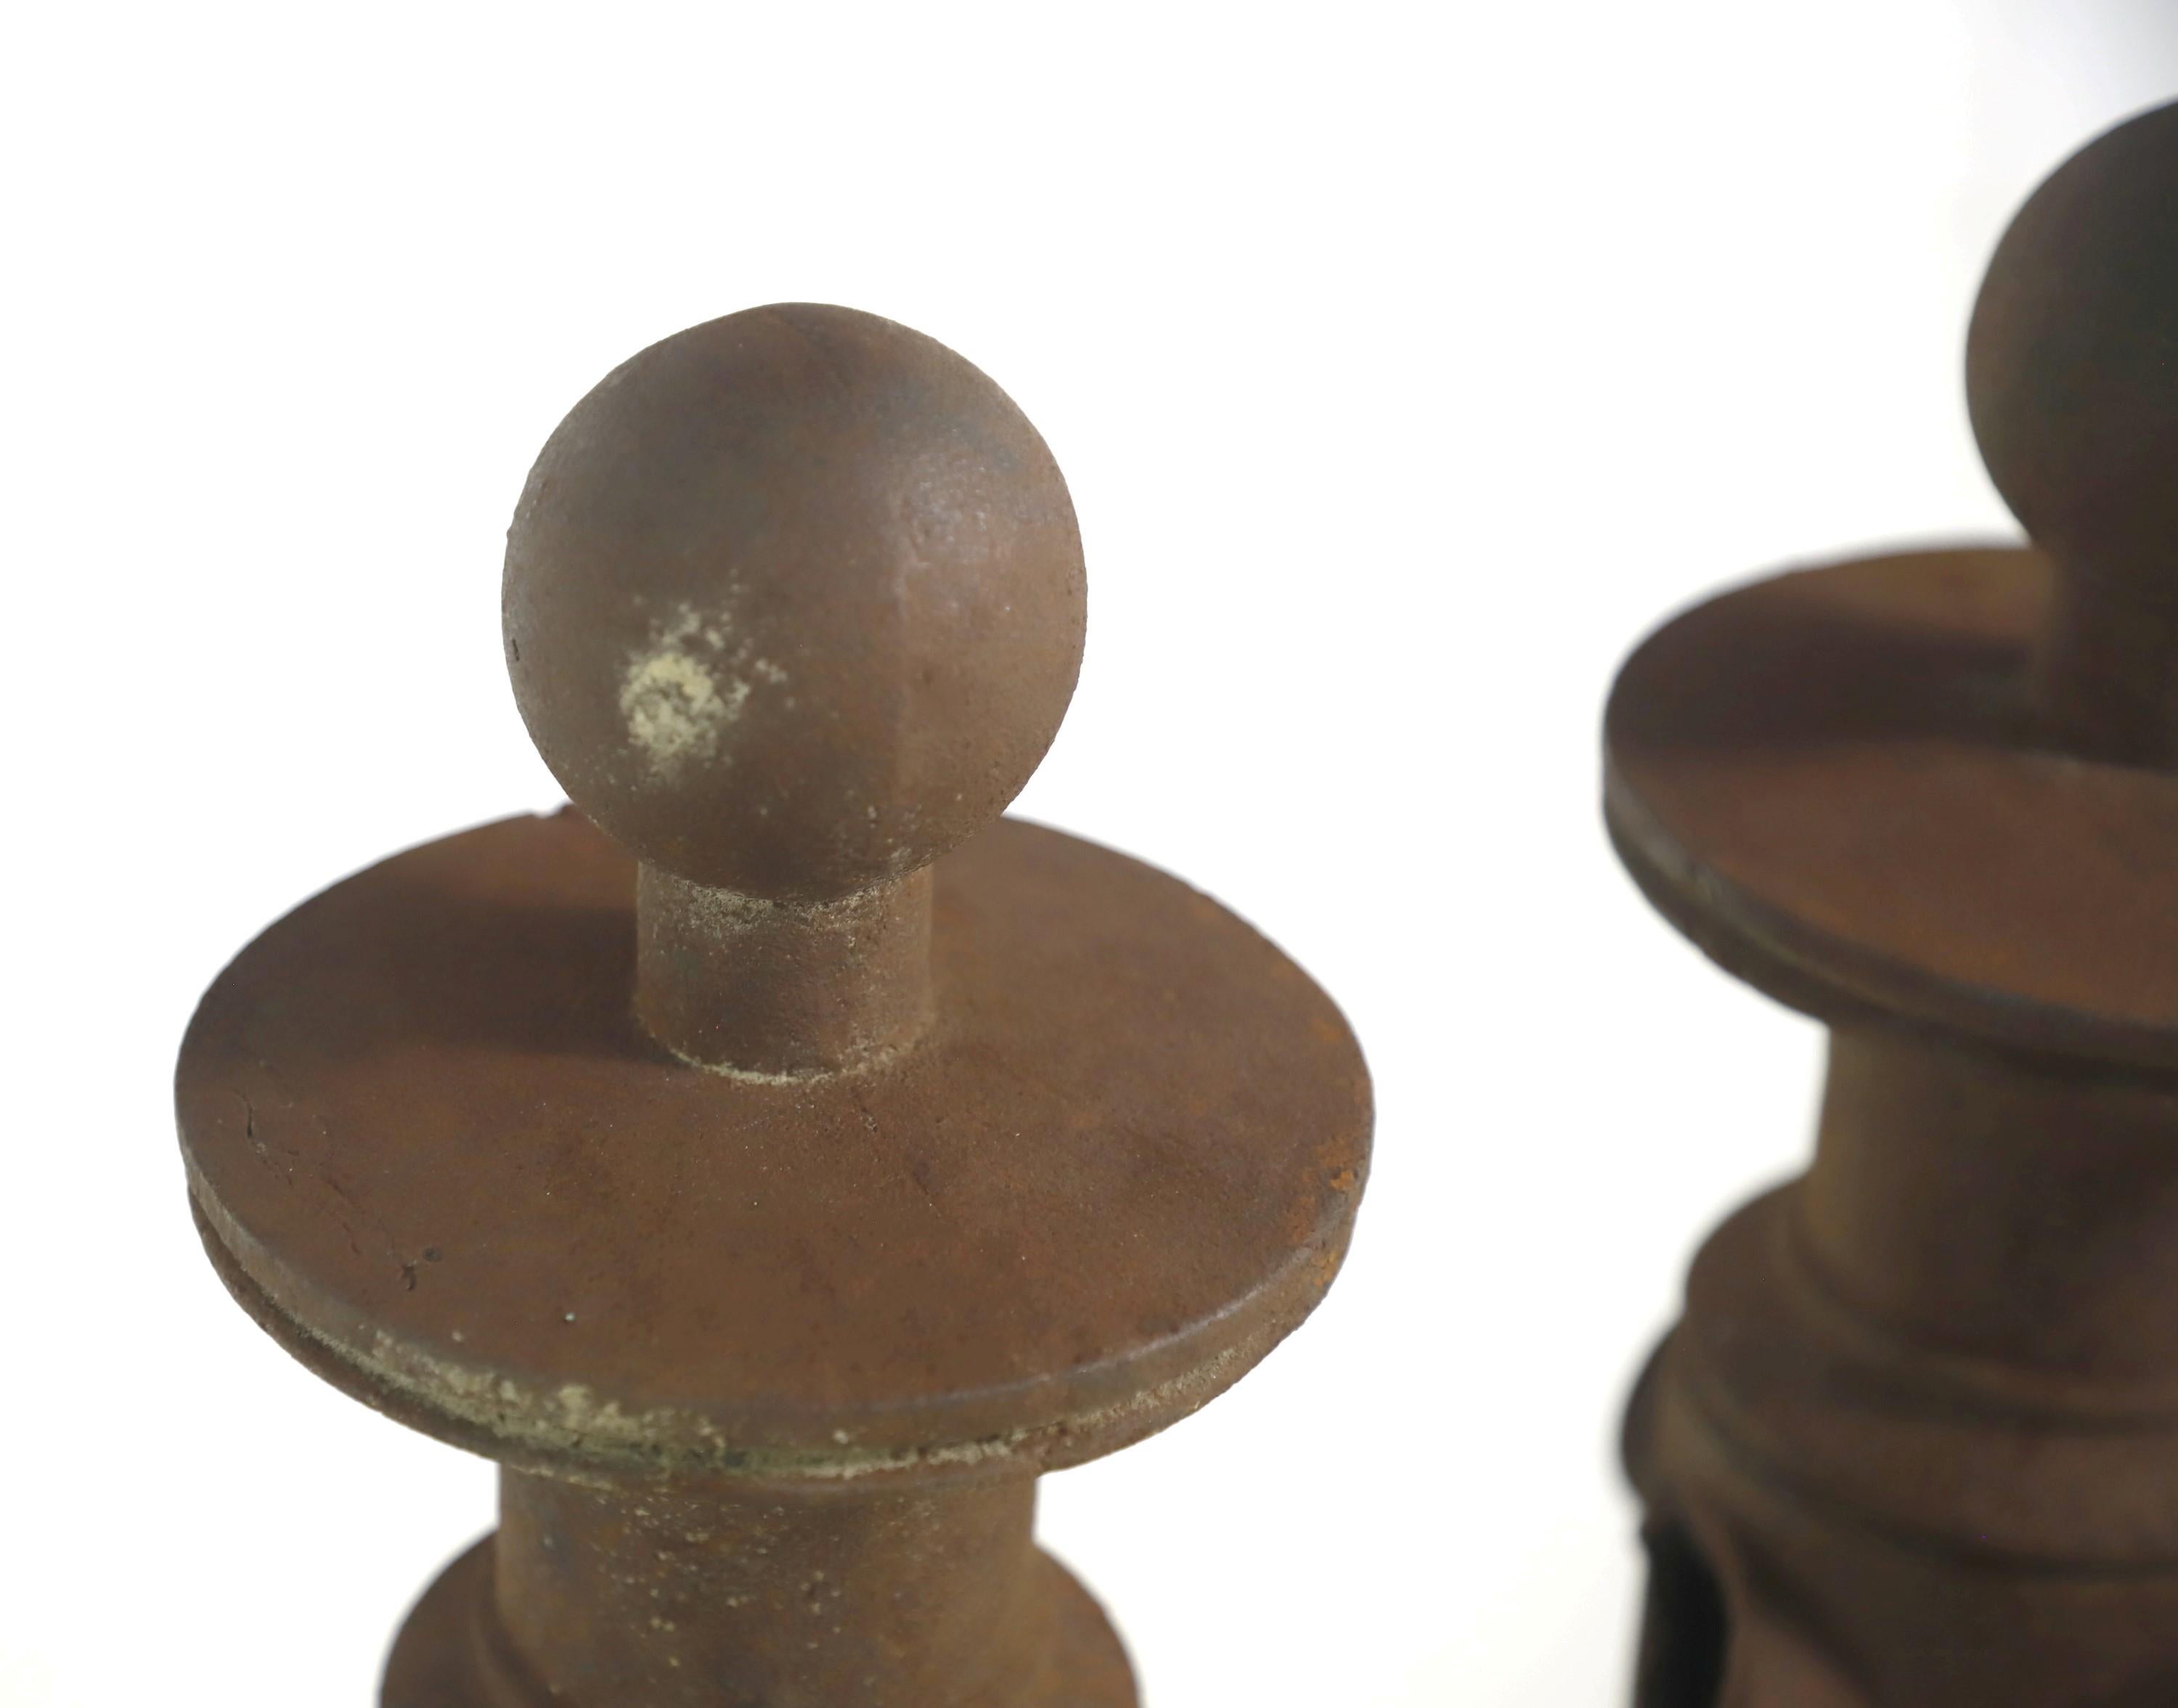 Brownstone fencing cast iron newel posts with an attached bolt plate on the bottoms. There is expected surface wear. Priced as a pair. Please note, this item is located in our Scranton, PA location.